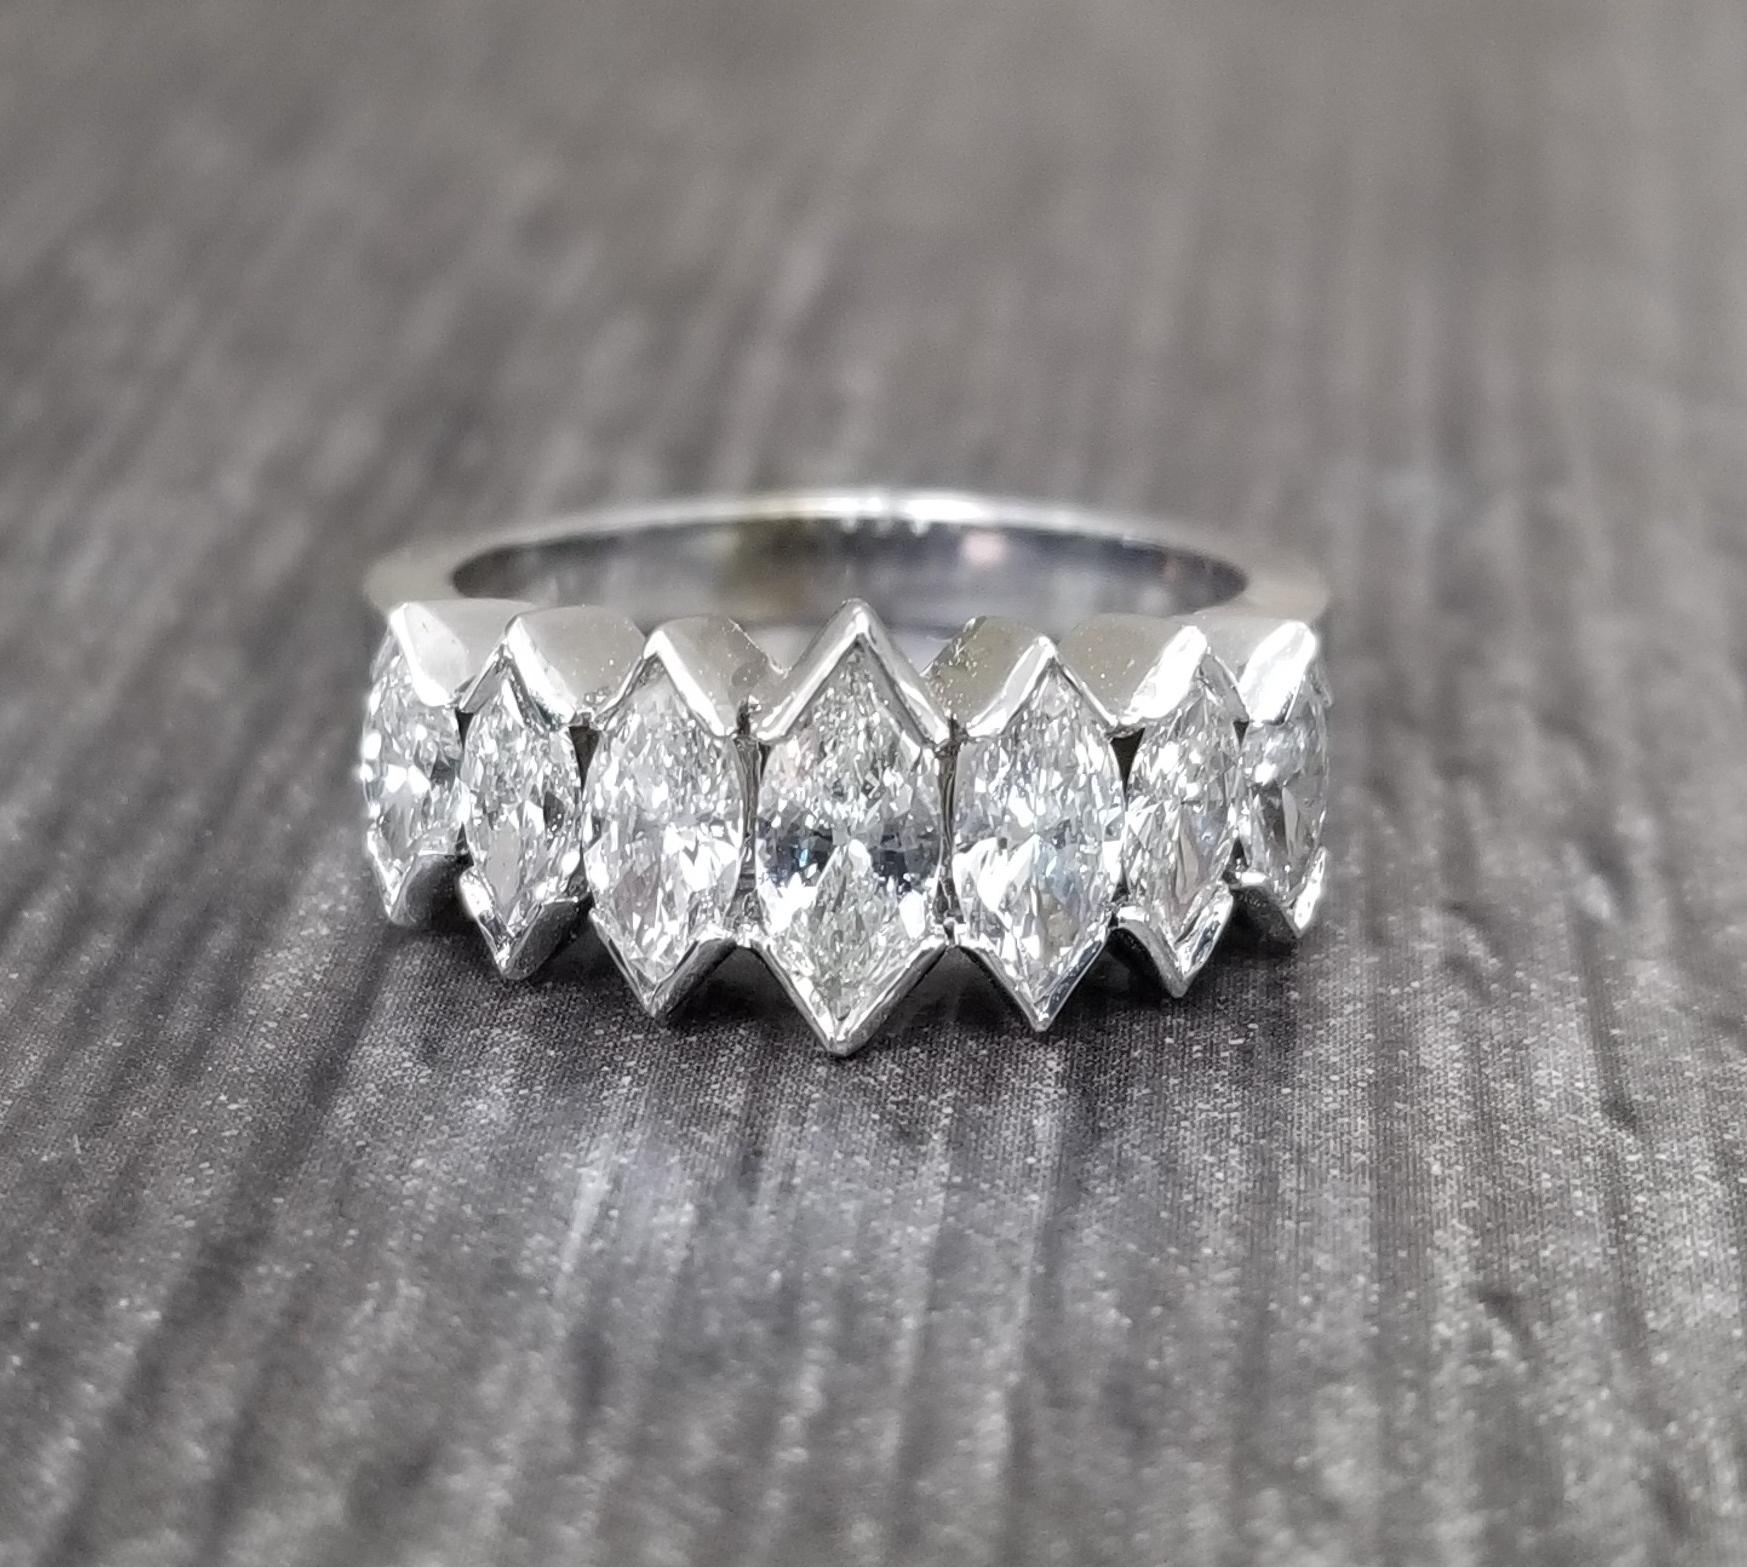 14k white gold ladies diamond wedding ring, containing 7 marquise cut diamonds of very fine quality weighing 1.55cts. ring size 6.5, ring can be sized to fit